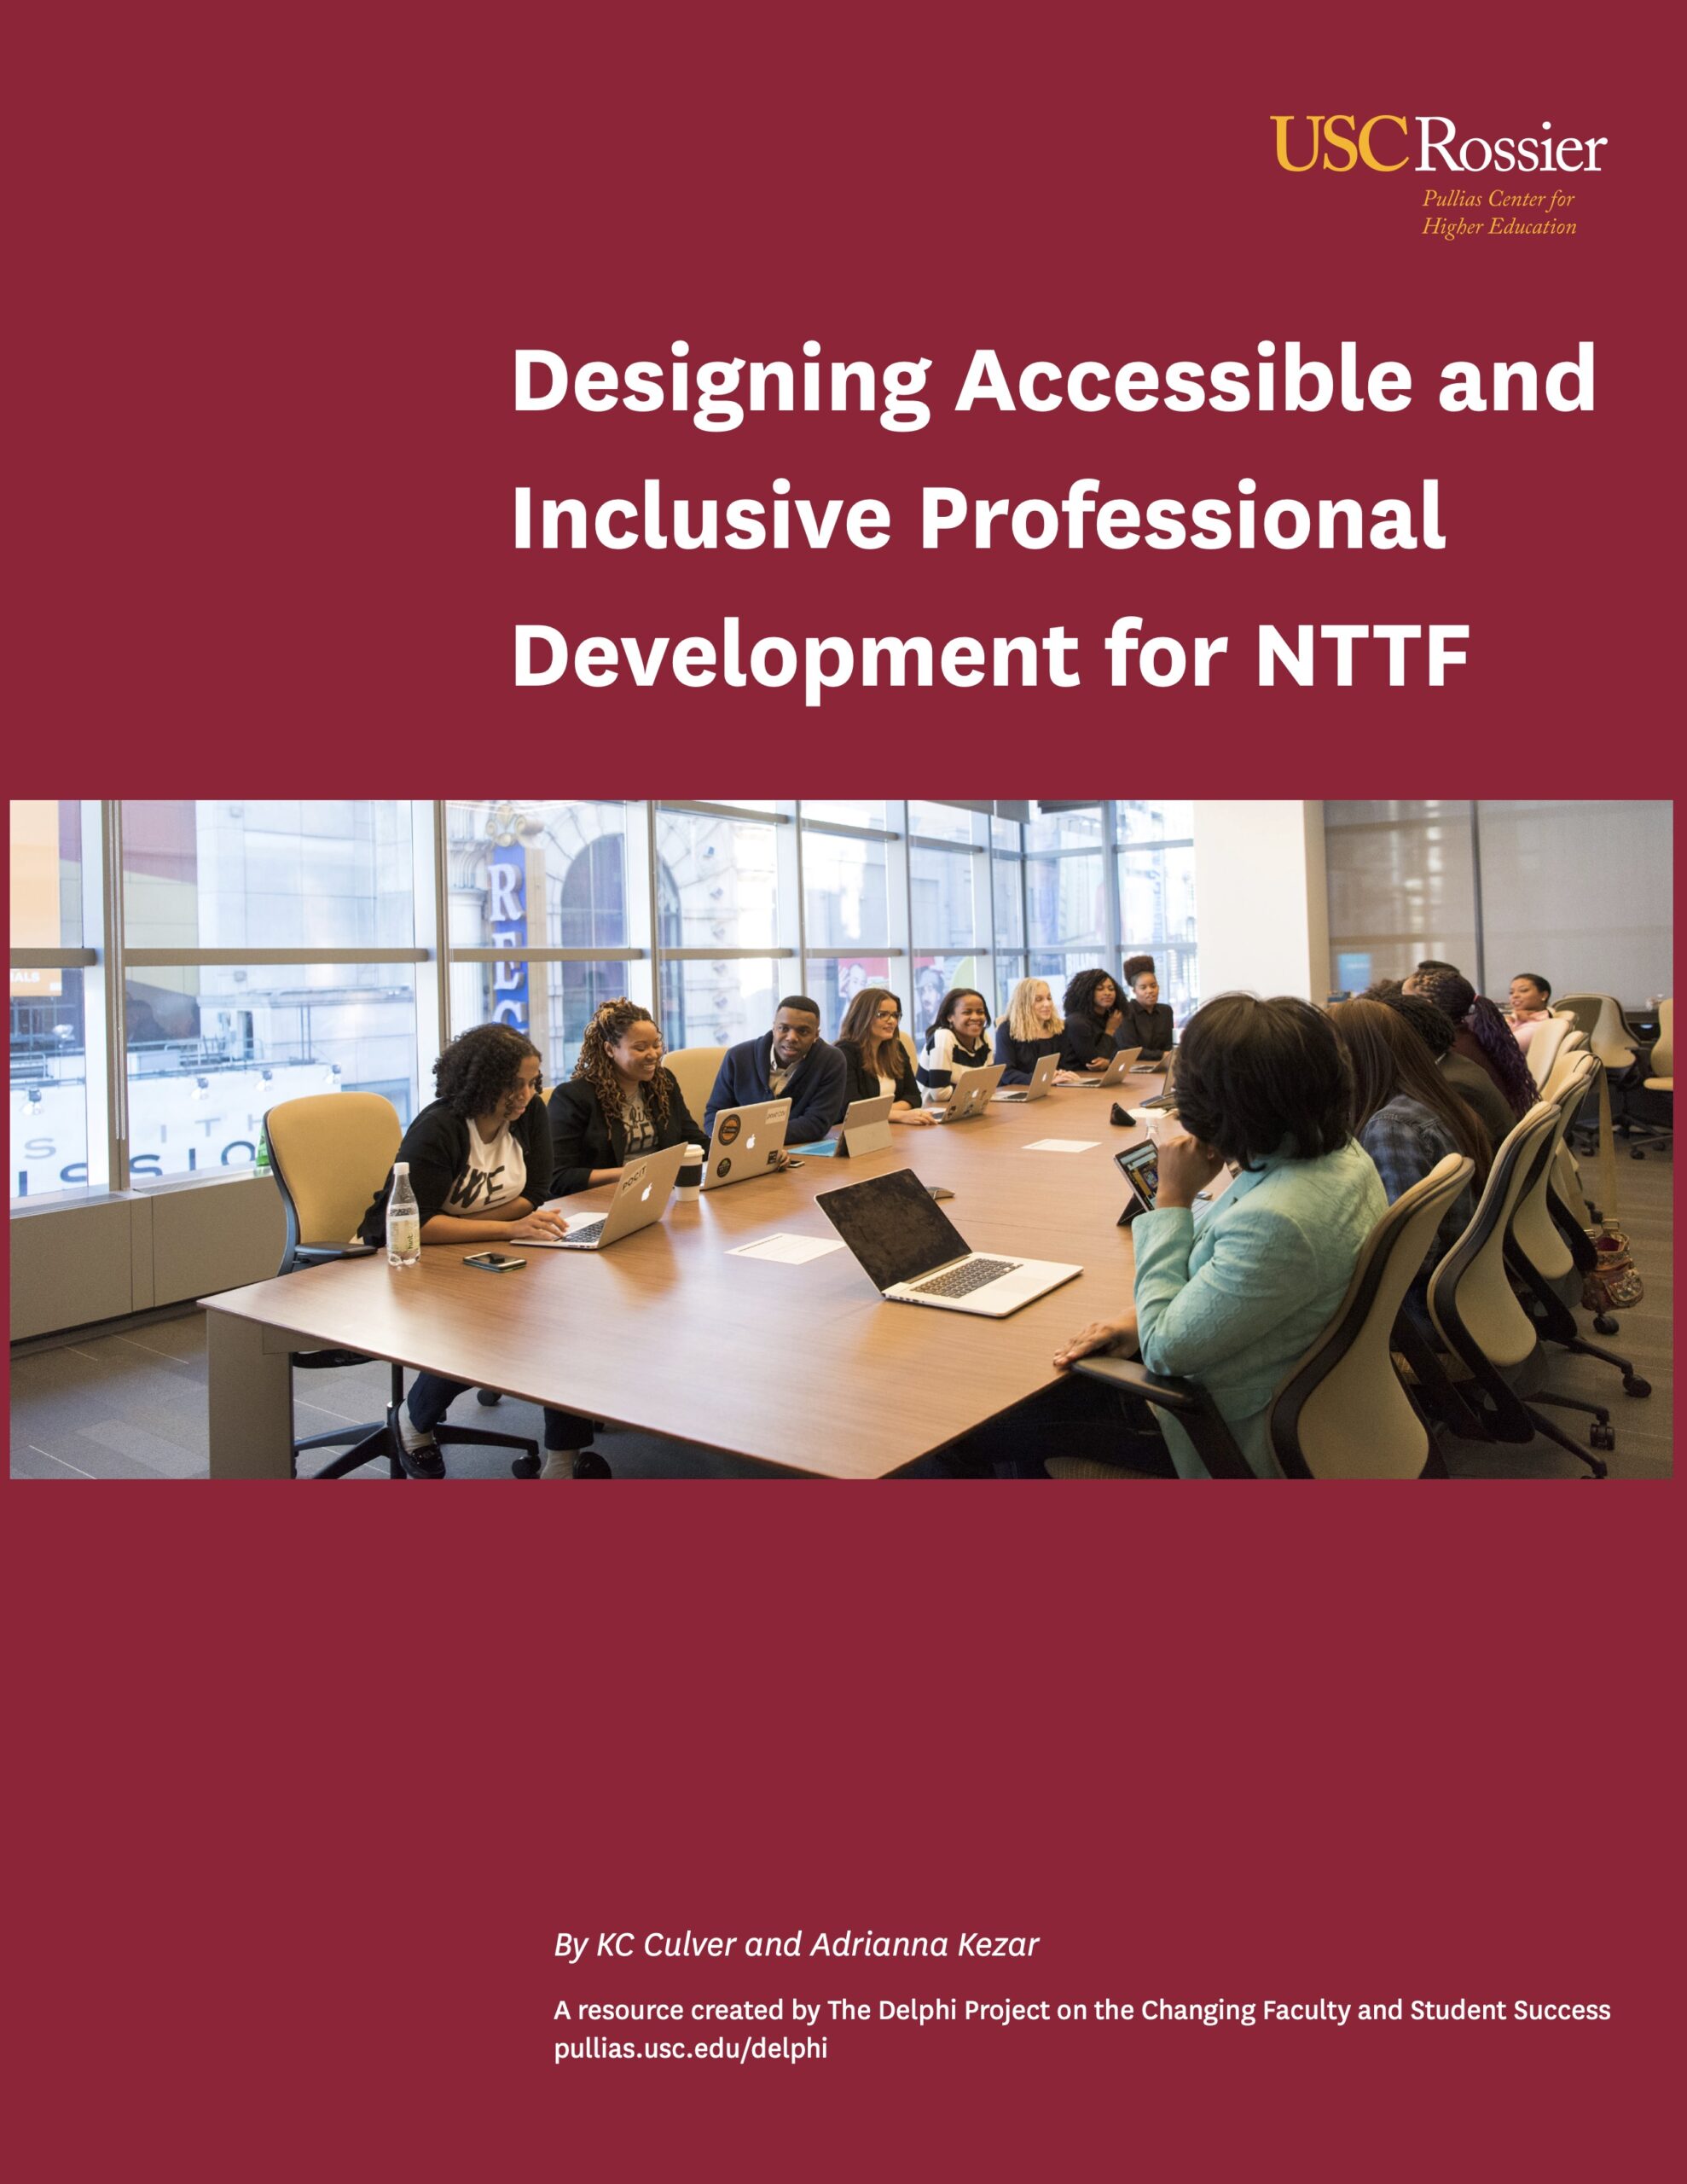 Designing Accessible and Inclusive Professional Development for NTTF